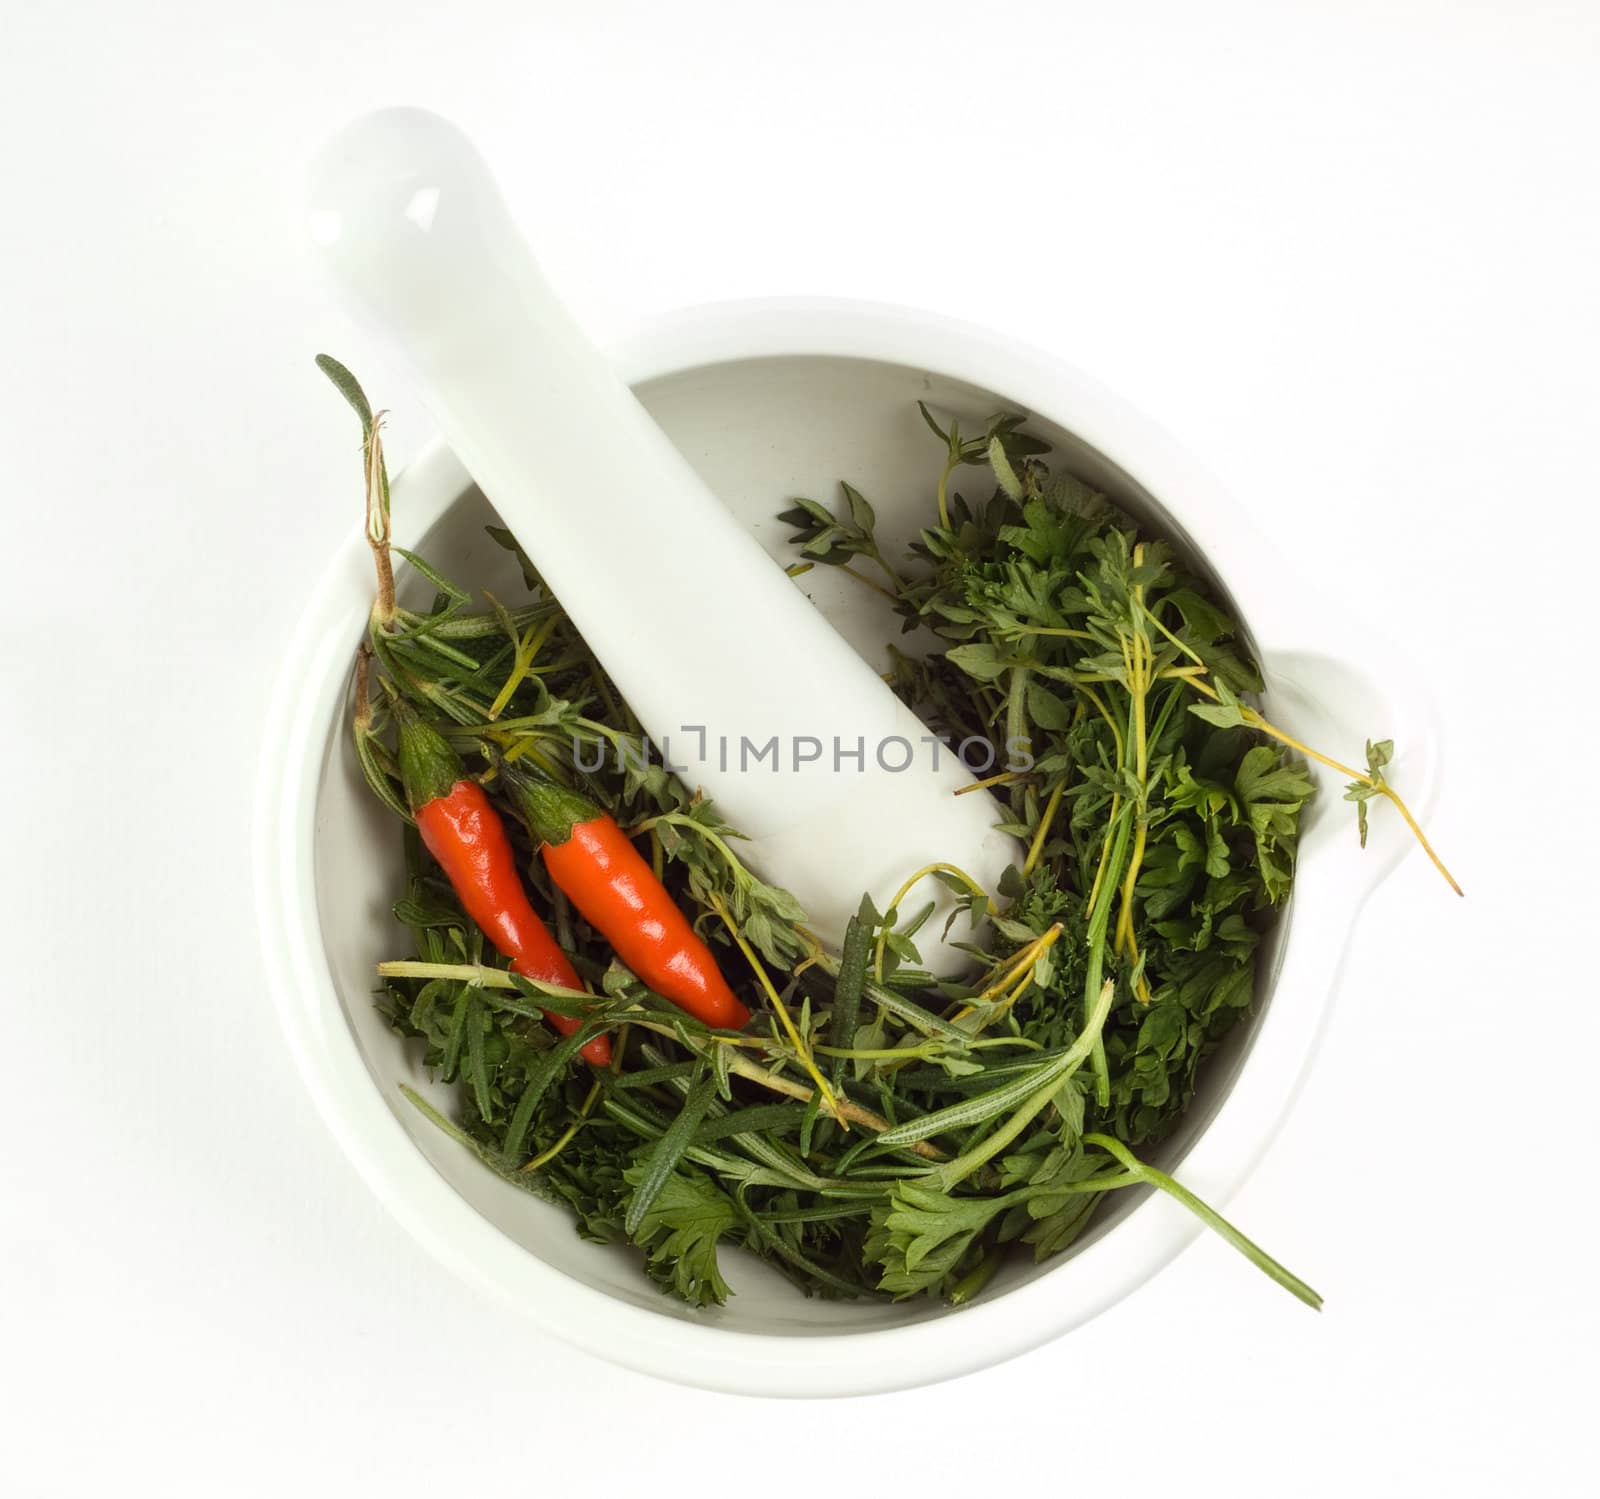 Mortar, pestle, herbs and peppers by alistaircotton